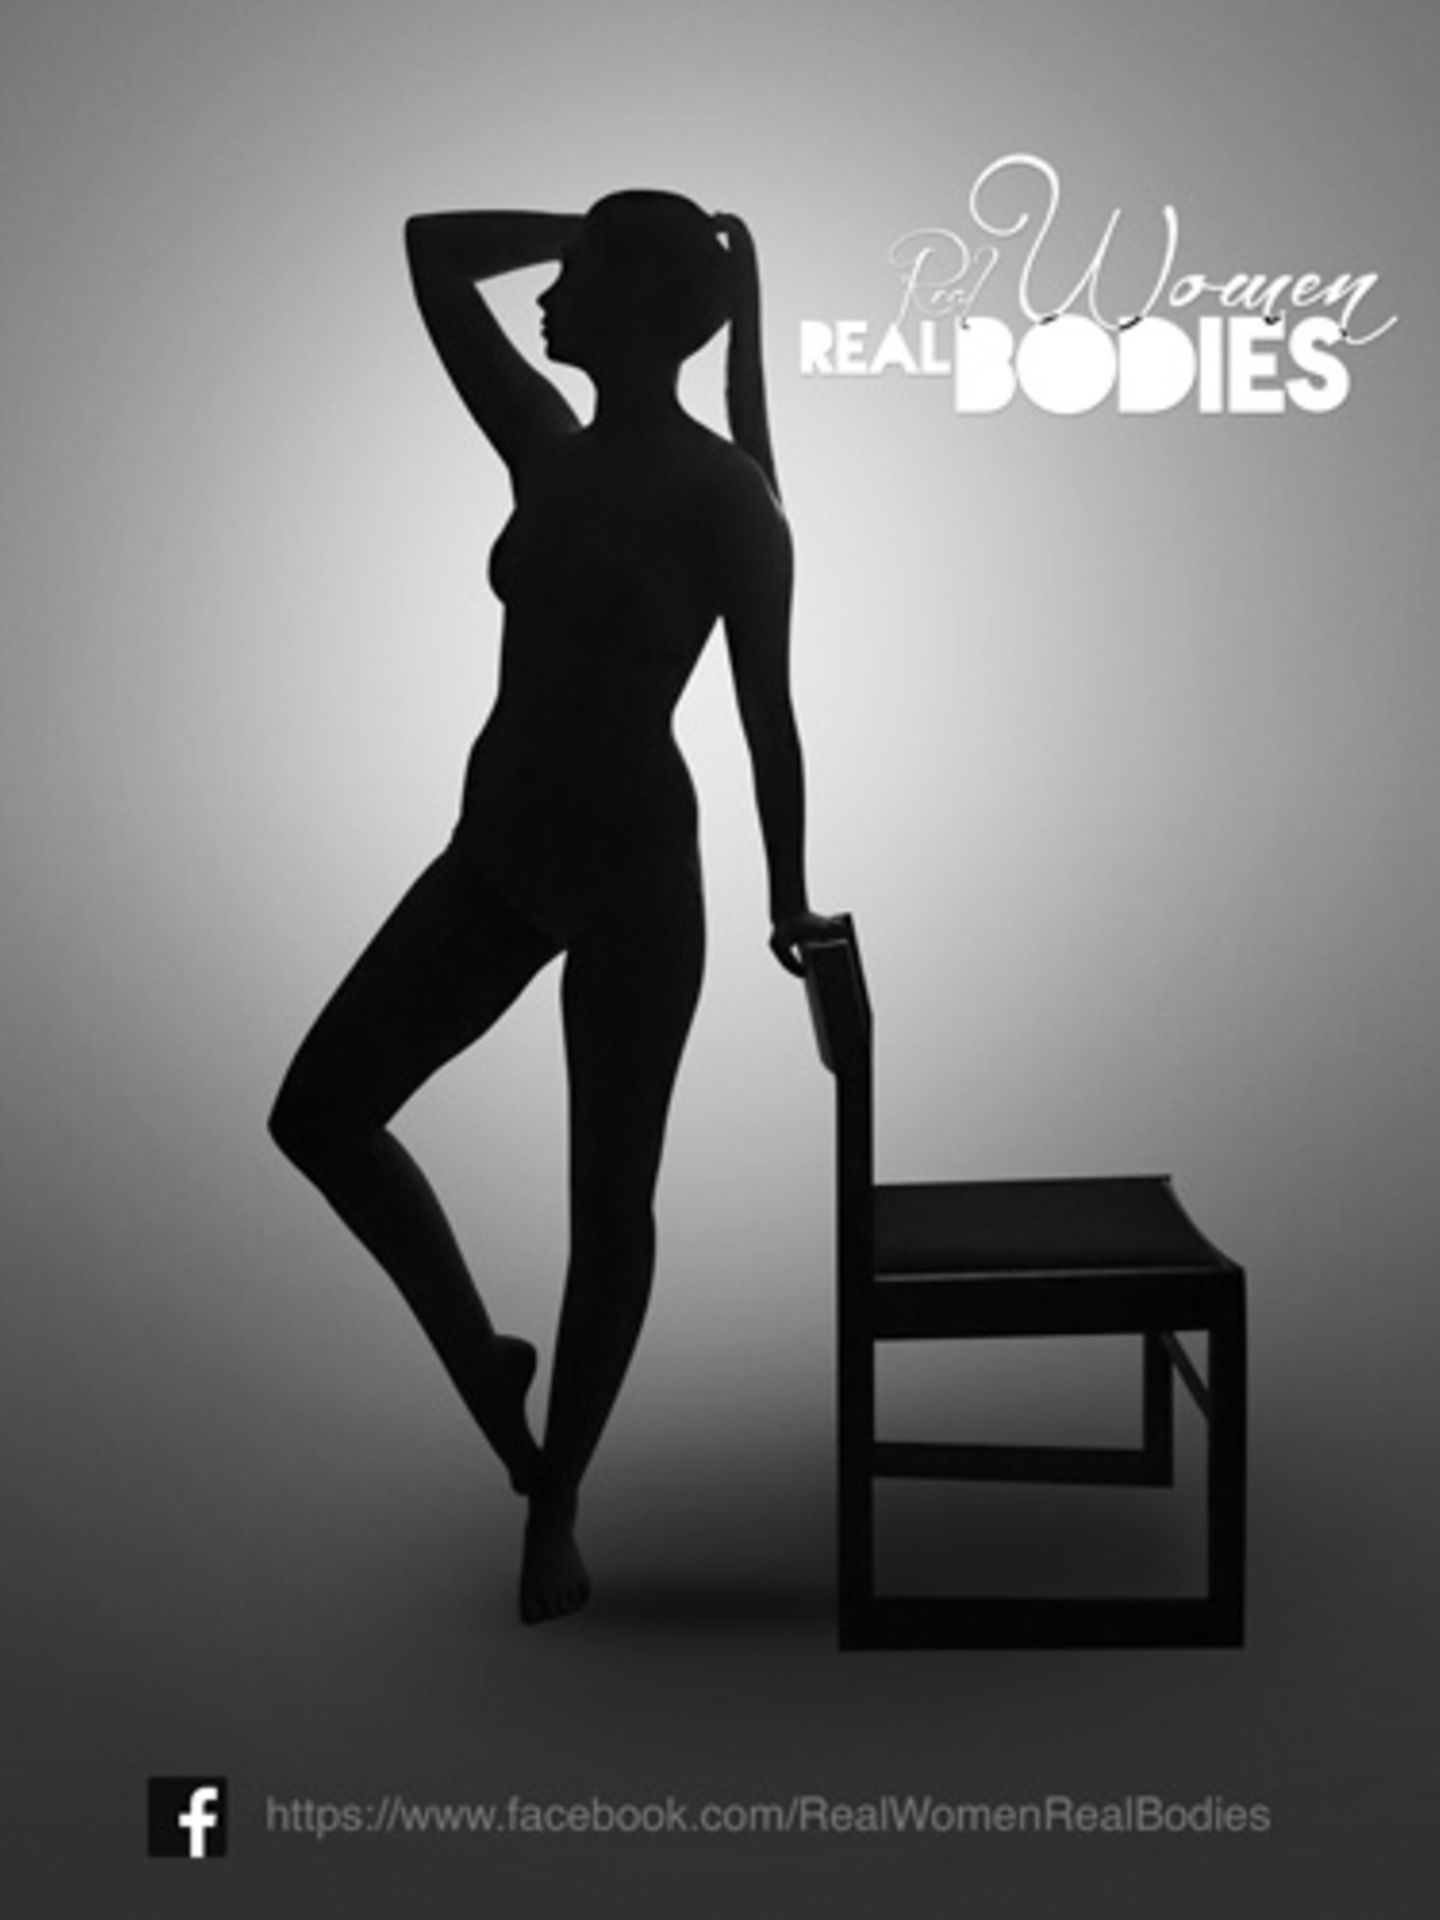 "Real Women, Real bodies"